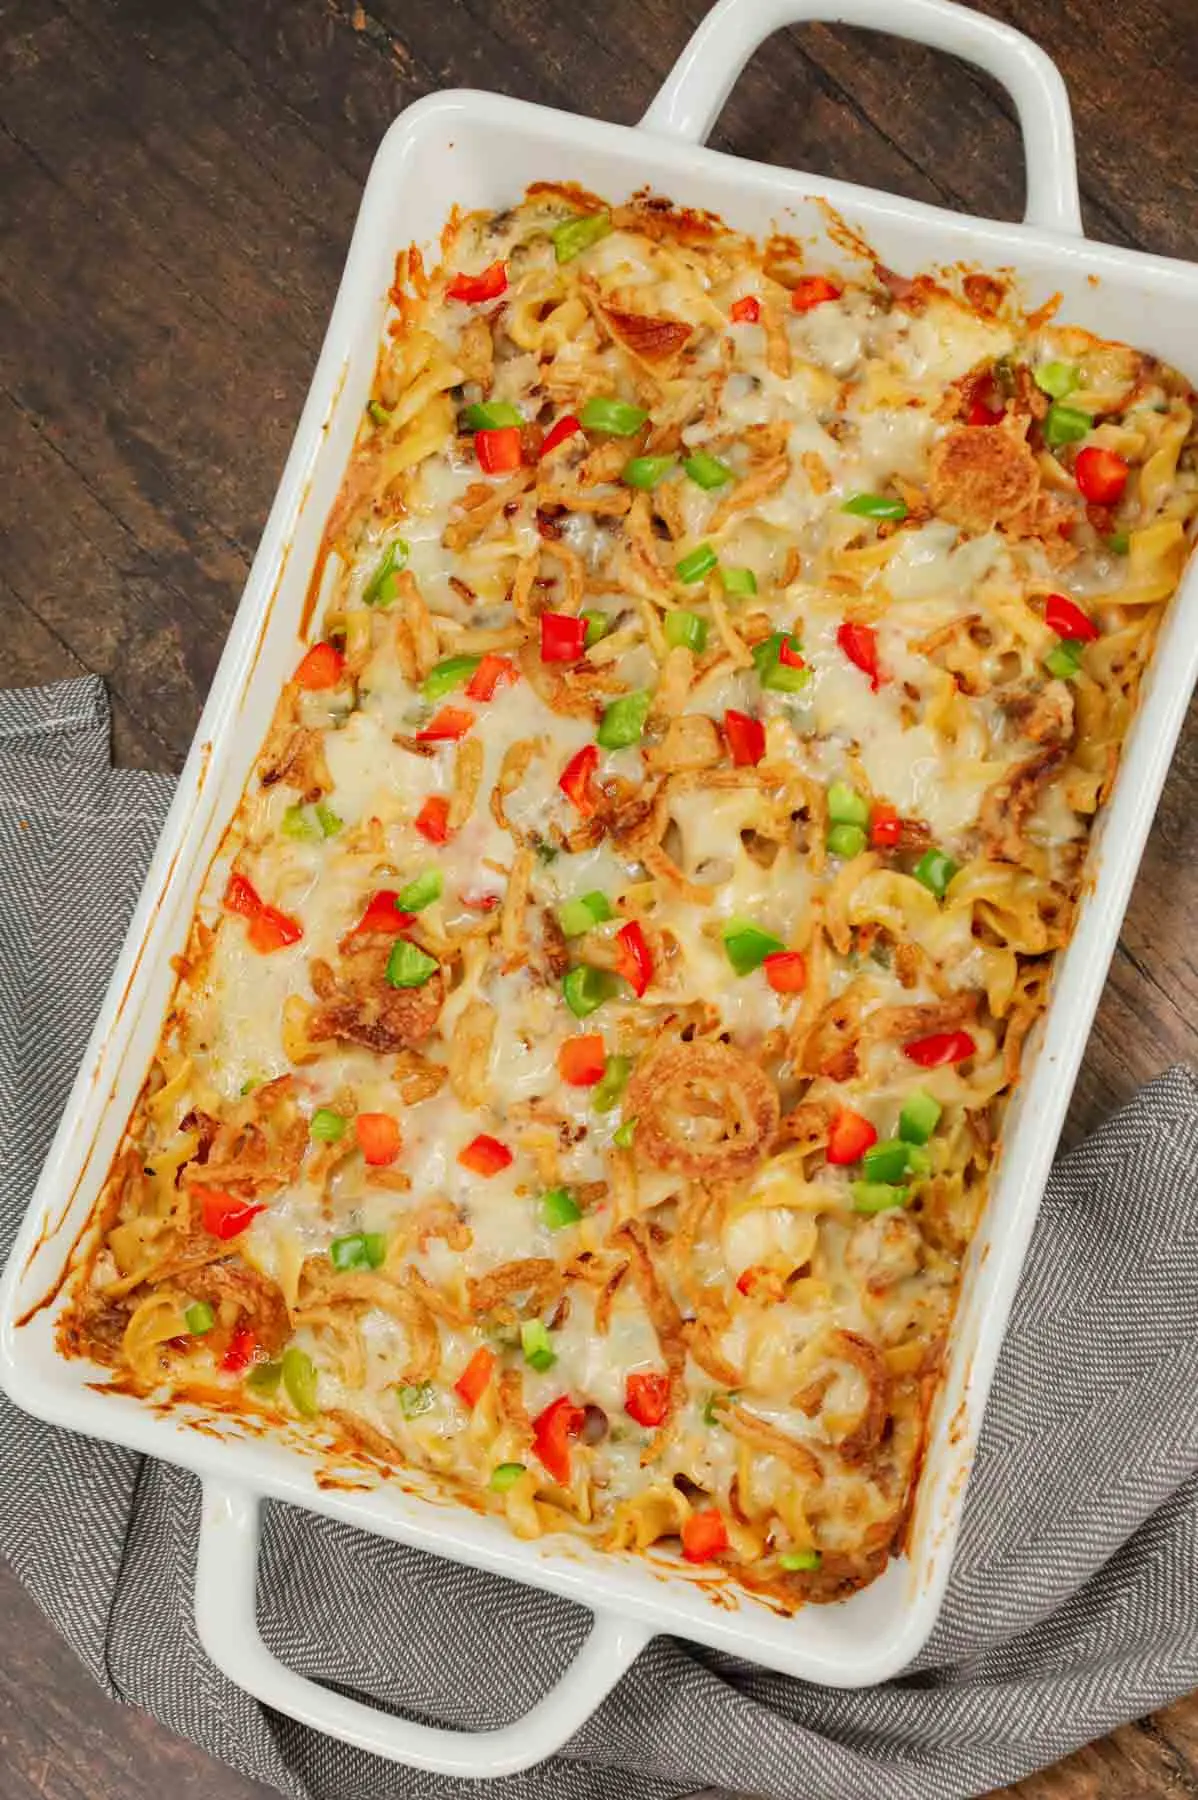 Sausage and Noodle Casserole is a hearty dinner recipe loaded with Italian sausage meat, egg noodle and diced bell peppers all tossed in a cream of mushroom and cream cheese mixture and baked with provolone cheese and French's crispy fried onions on top.